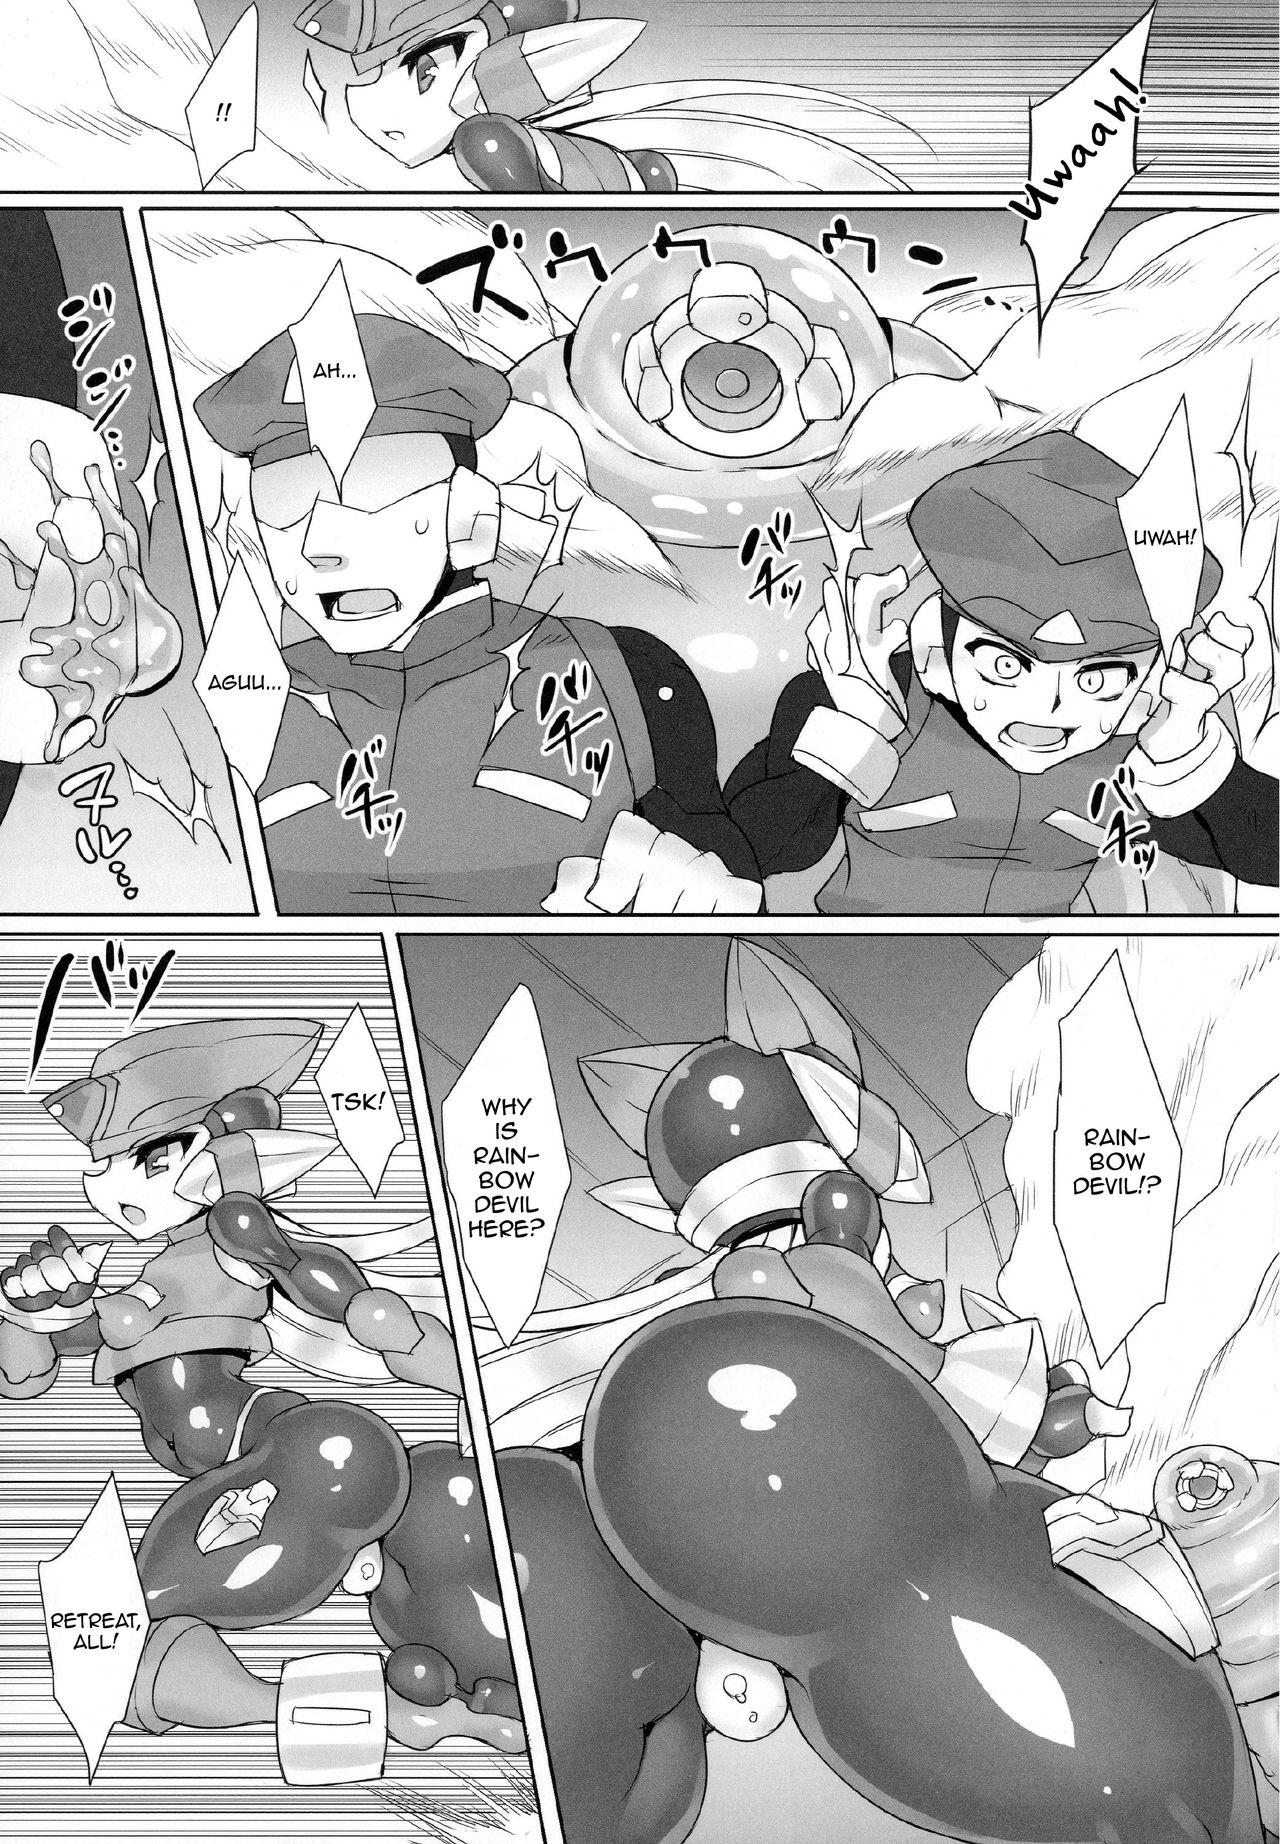 Head Red Hero Does Not Yield - Megaman zero 1080p - Page 5